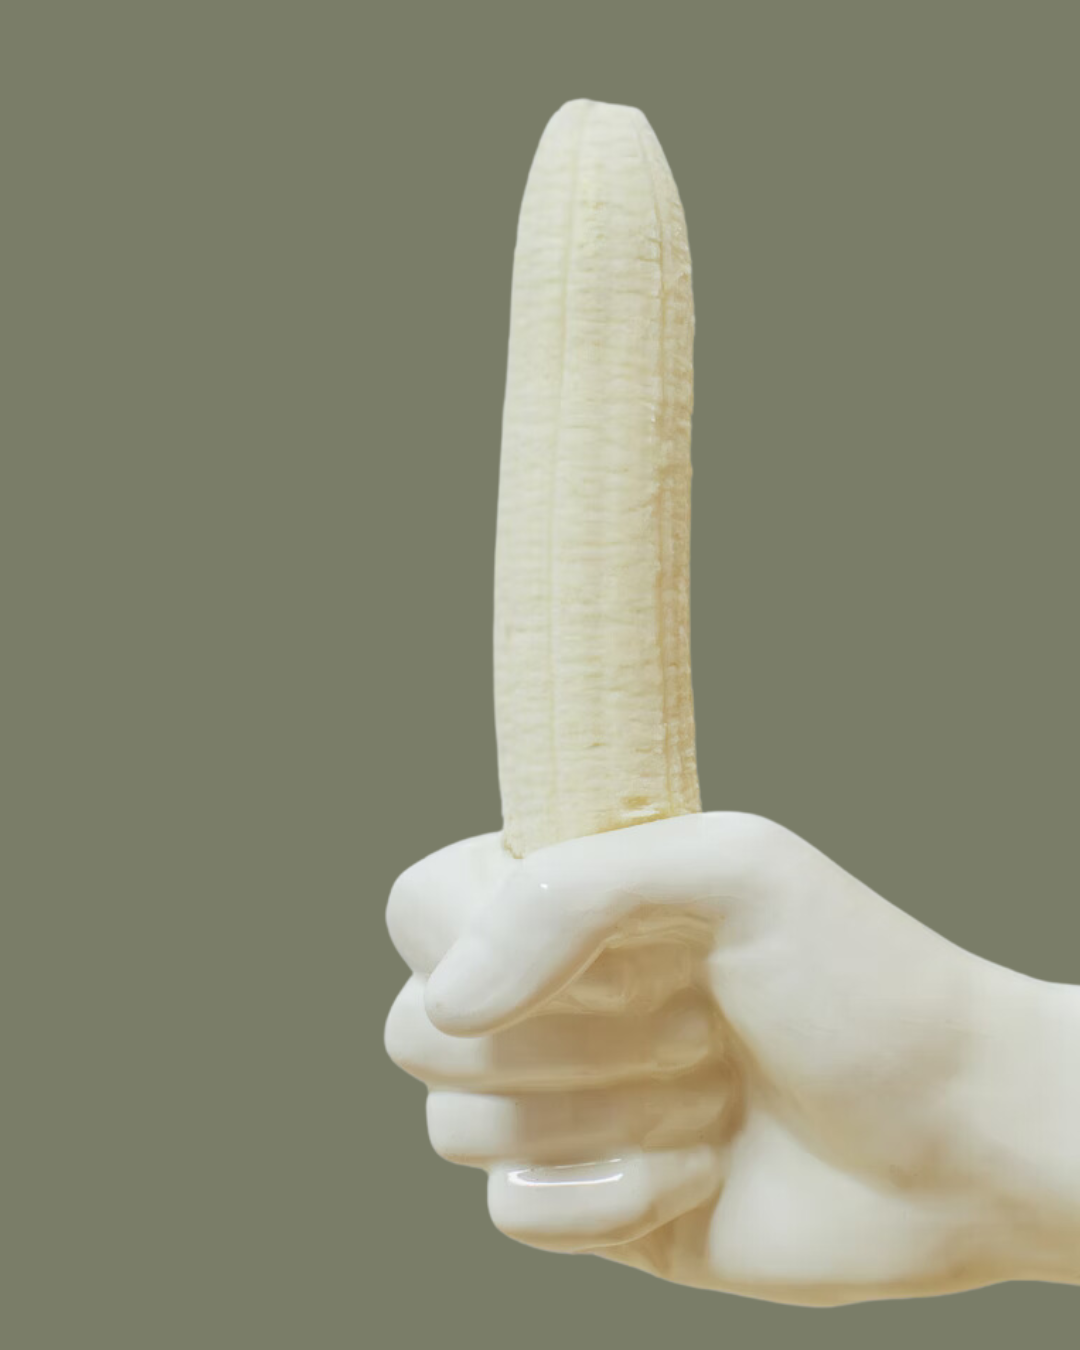 Ceramic hand holding an unpeeled banana against a dark green background.